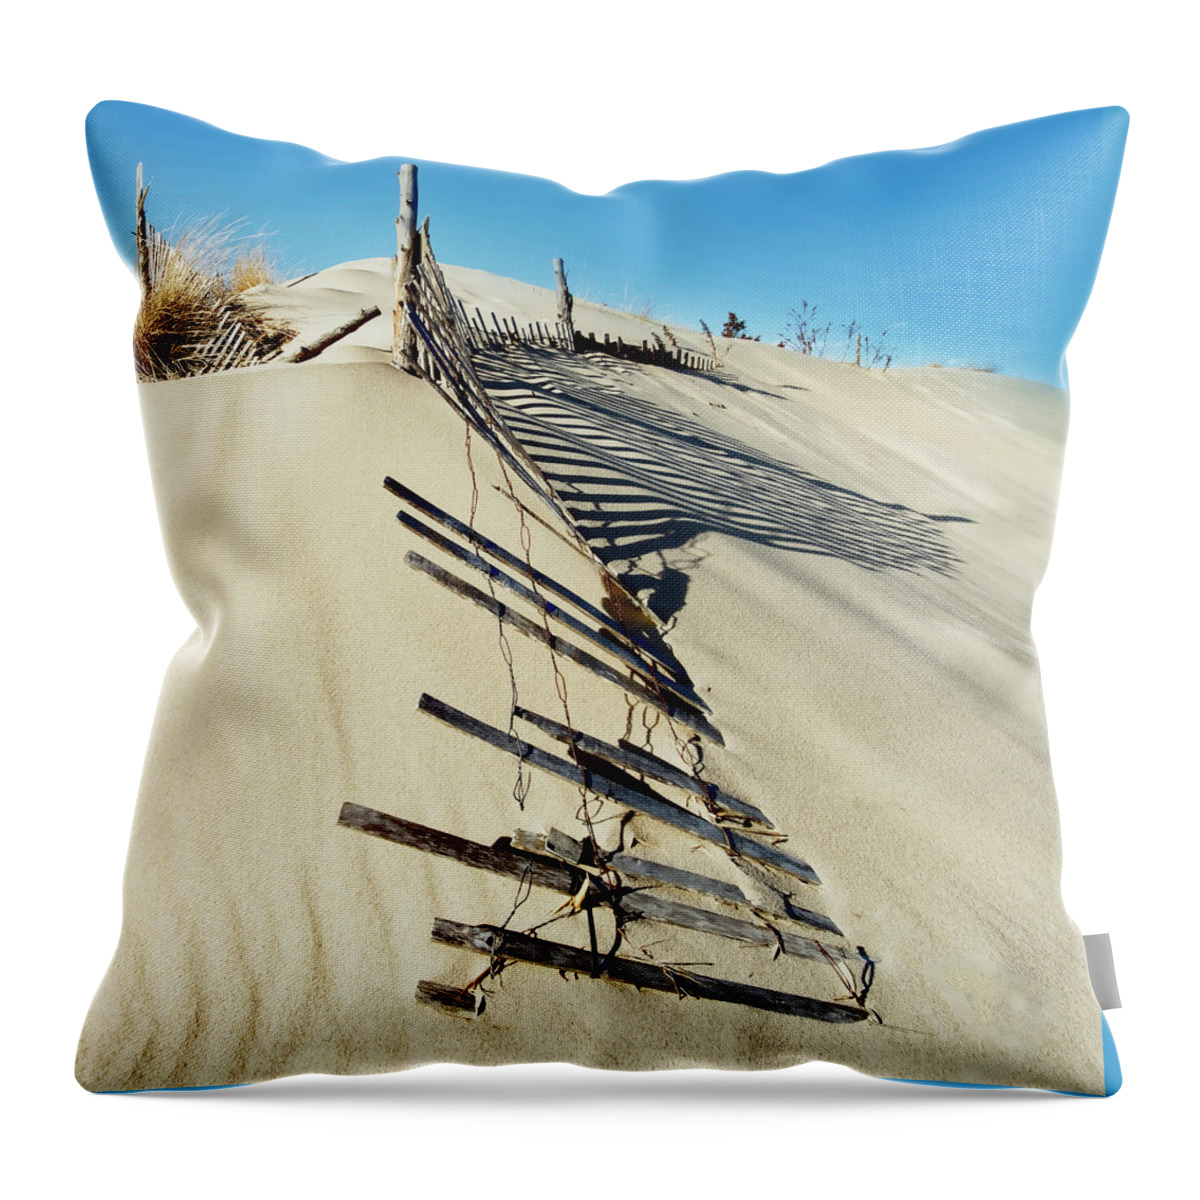 Sandy Hook Throw Pillow featuring the photograph Sand Dune Fences And Shadows by Gary Slawsky